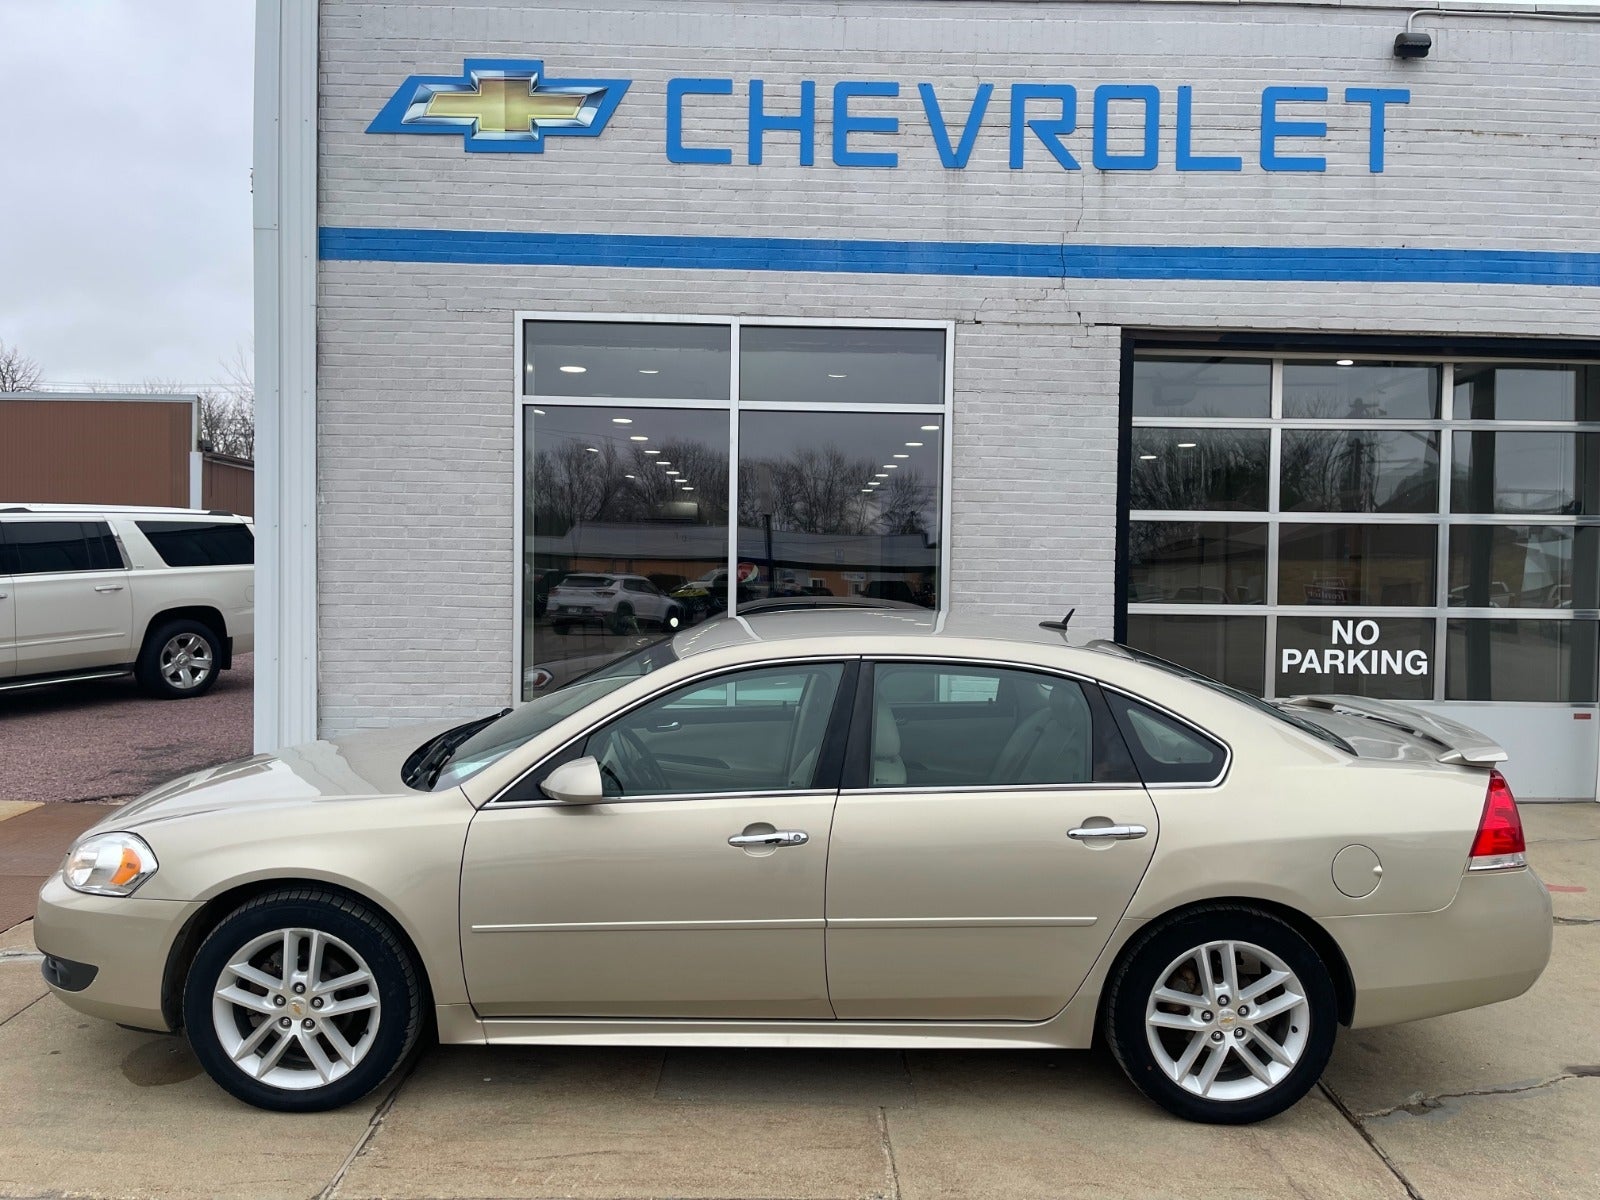 Used 2010 Chevrolet Impala LTZ with VIN 2G1WC5EM8A1260428 for sale in Edgerton, Minnesota